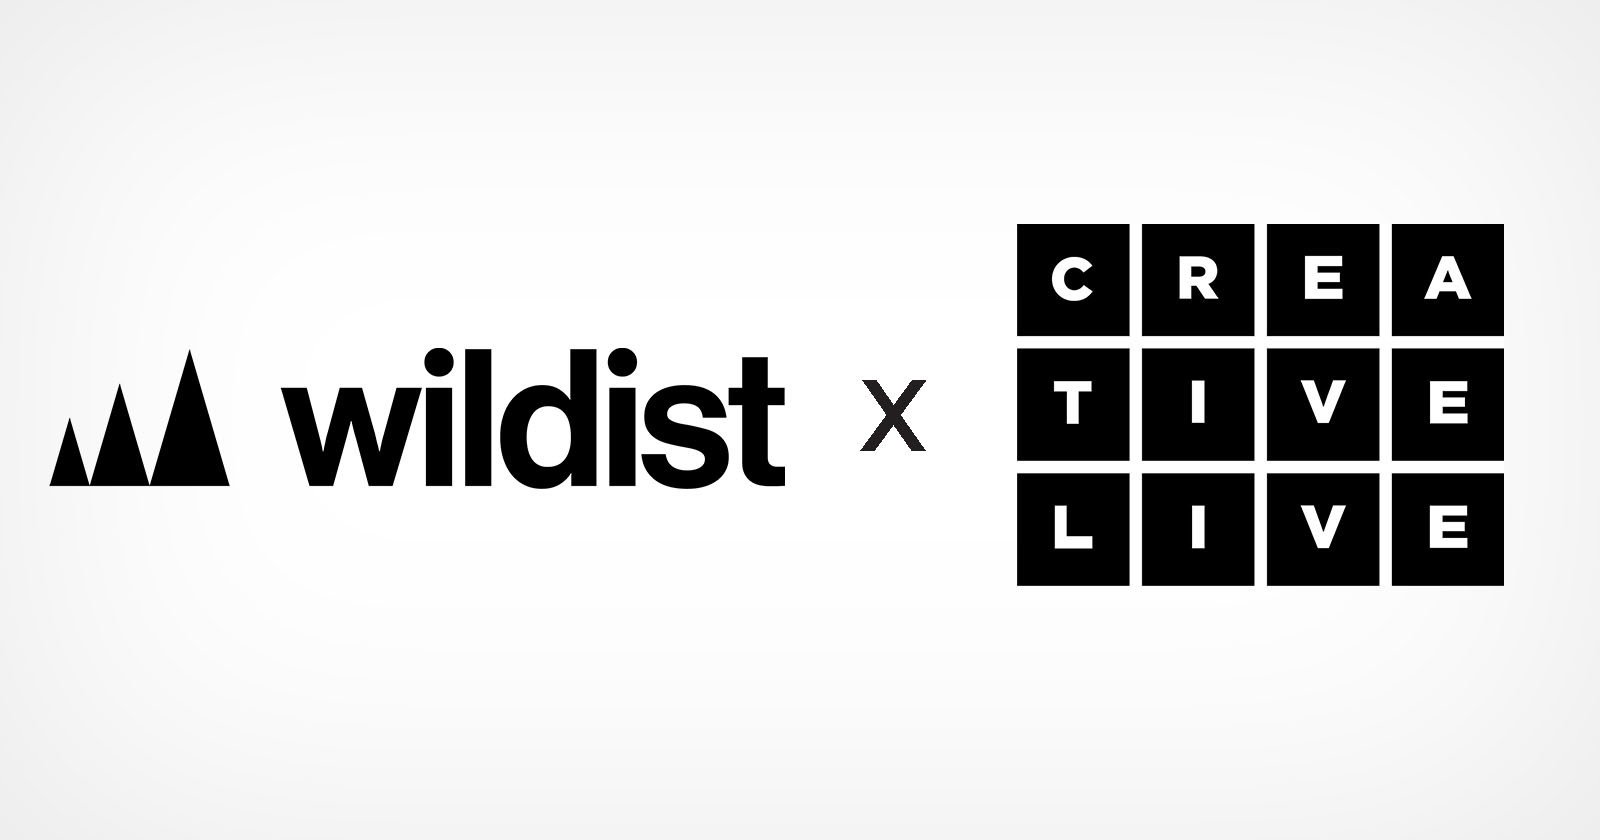  creativelive has acquired online photography course provider wildist 